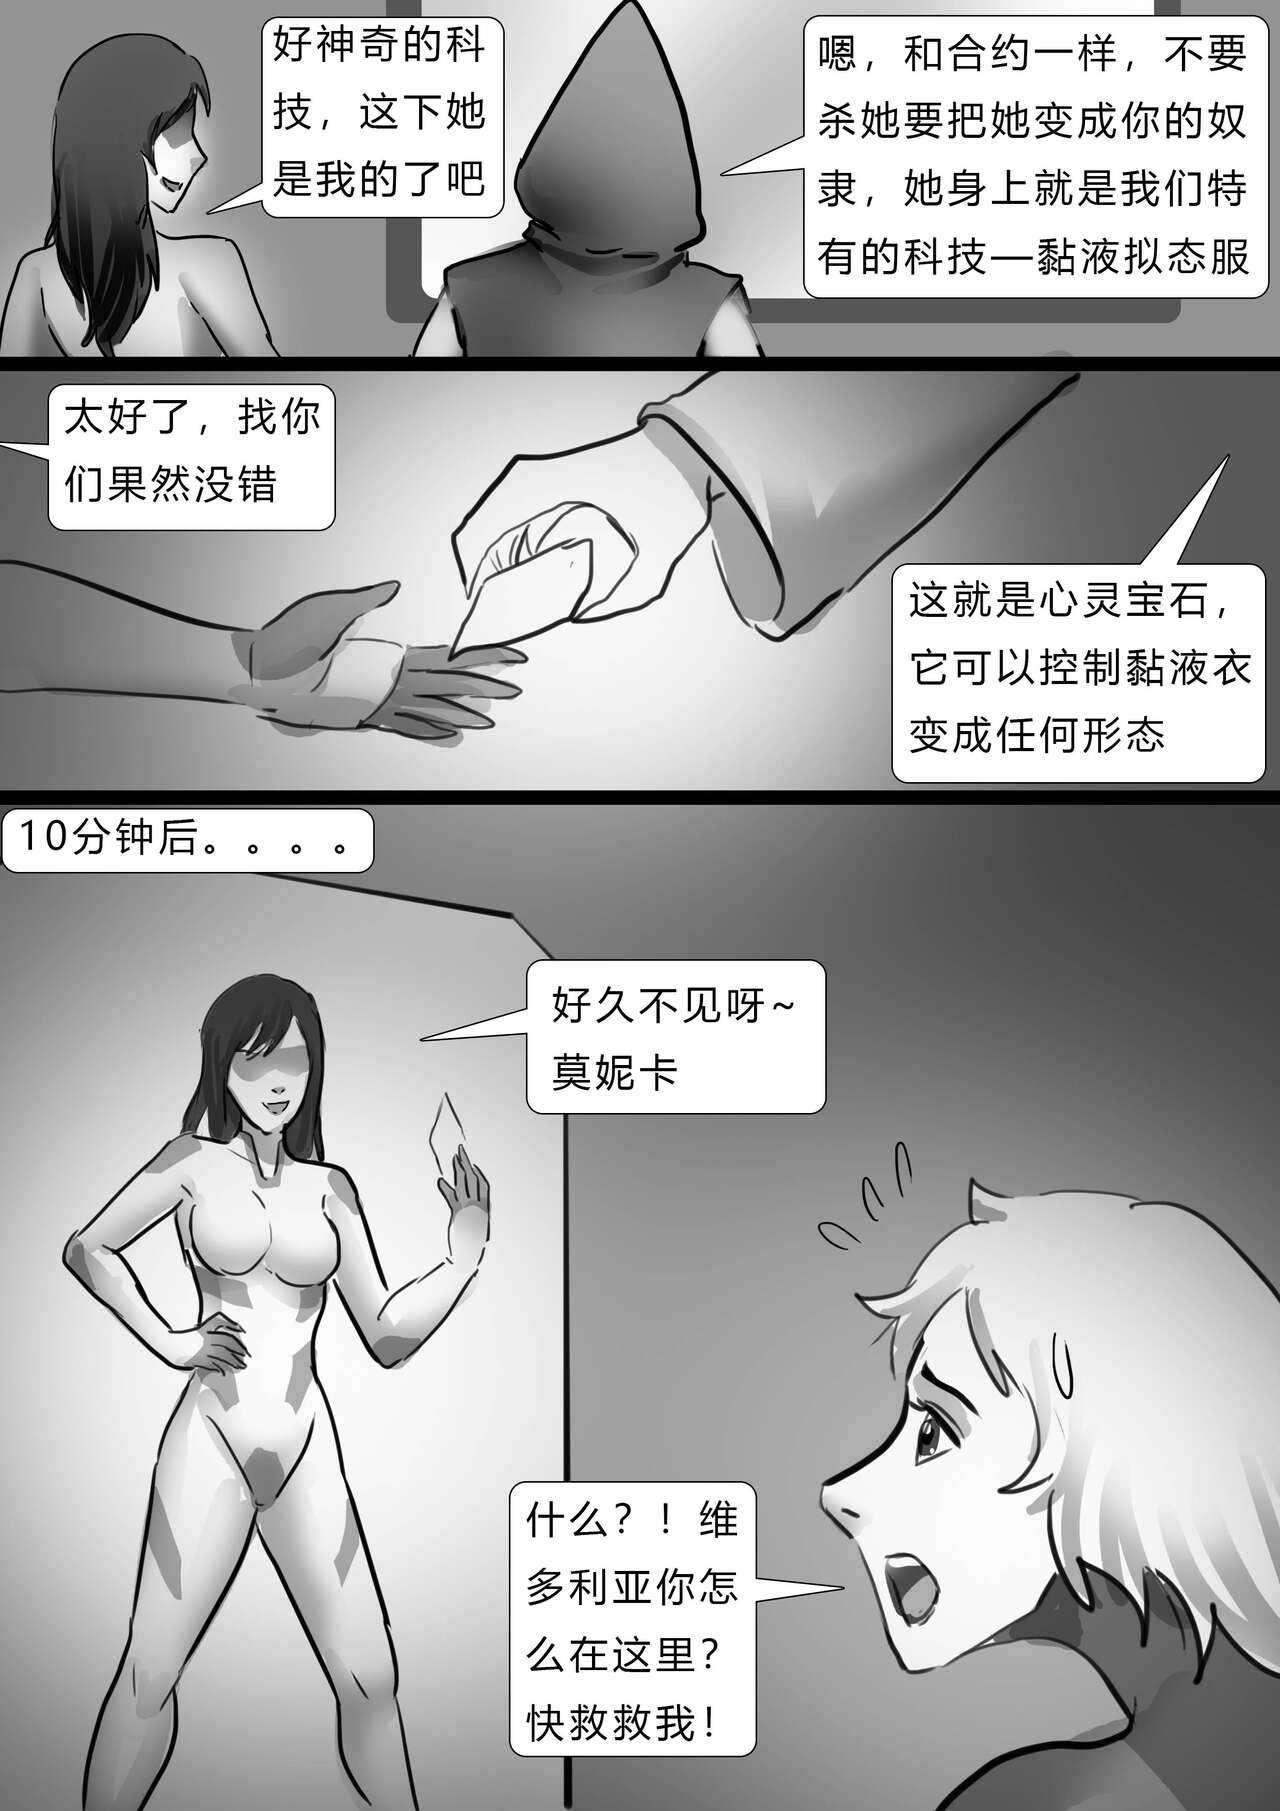 Old And Young 千变女奴 Thousand-change slave girl Deutsche - Page 9